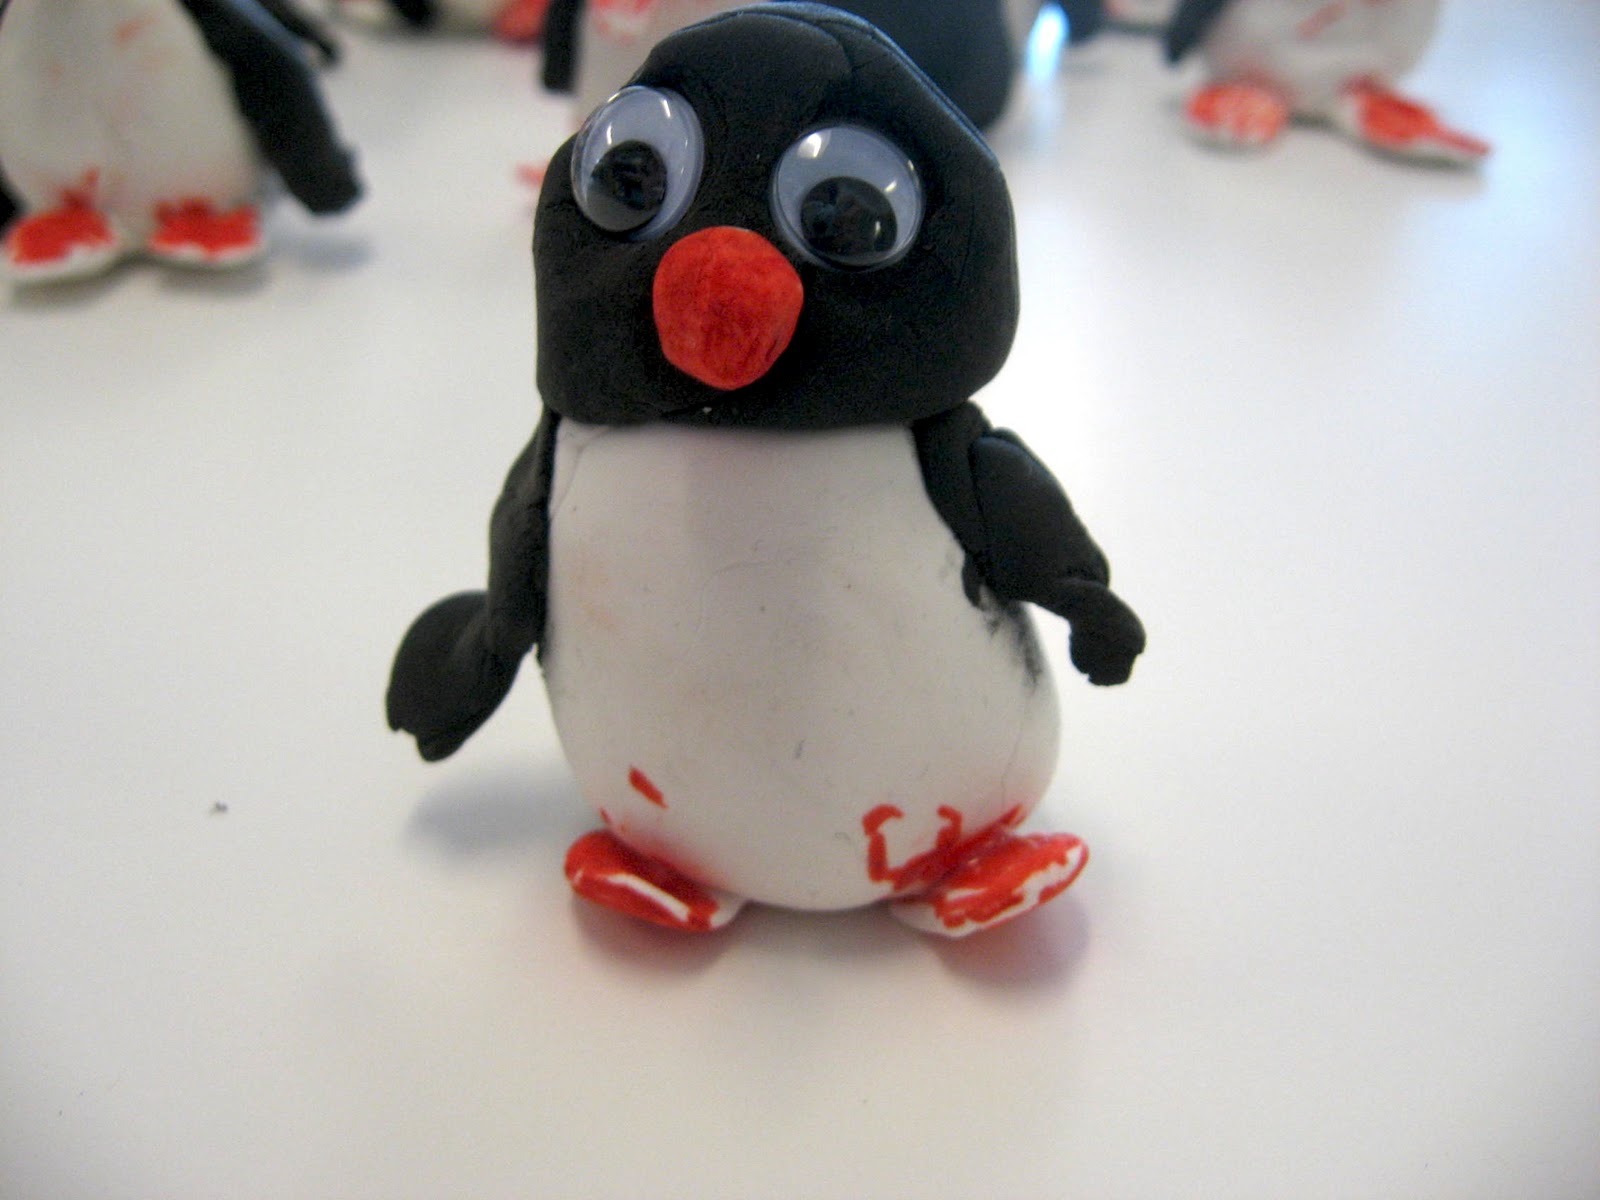 How to make a penguin out of model magic clay @artmakeslifemeri 